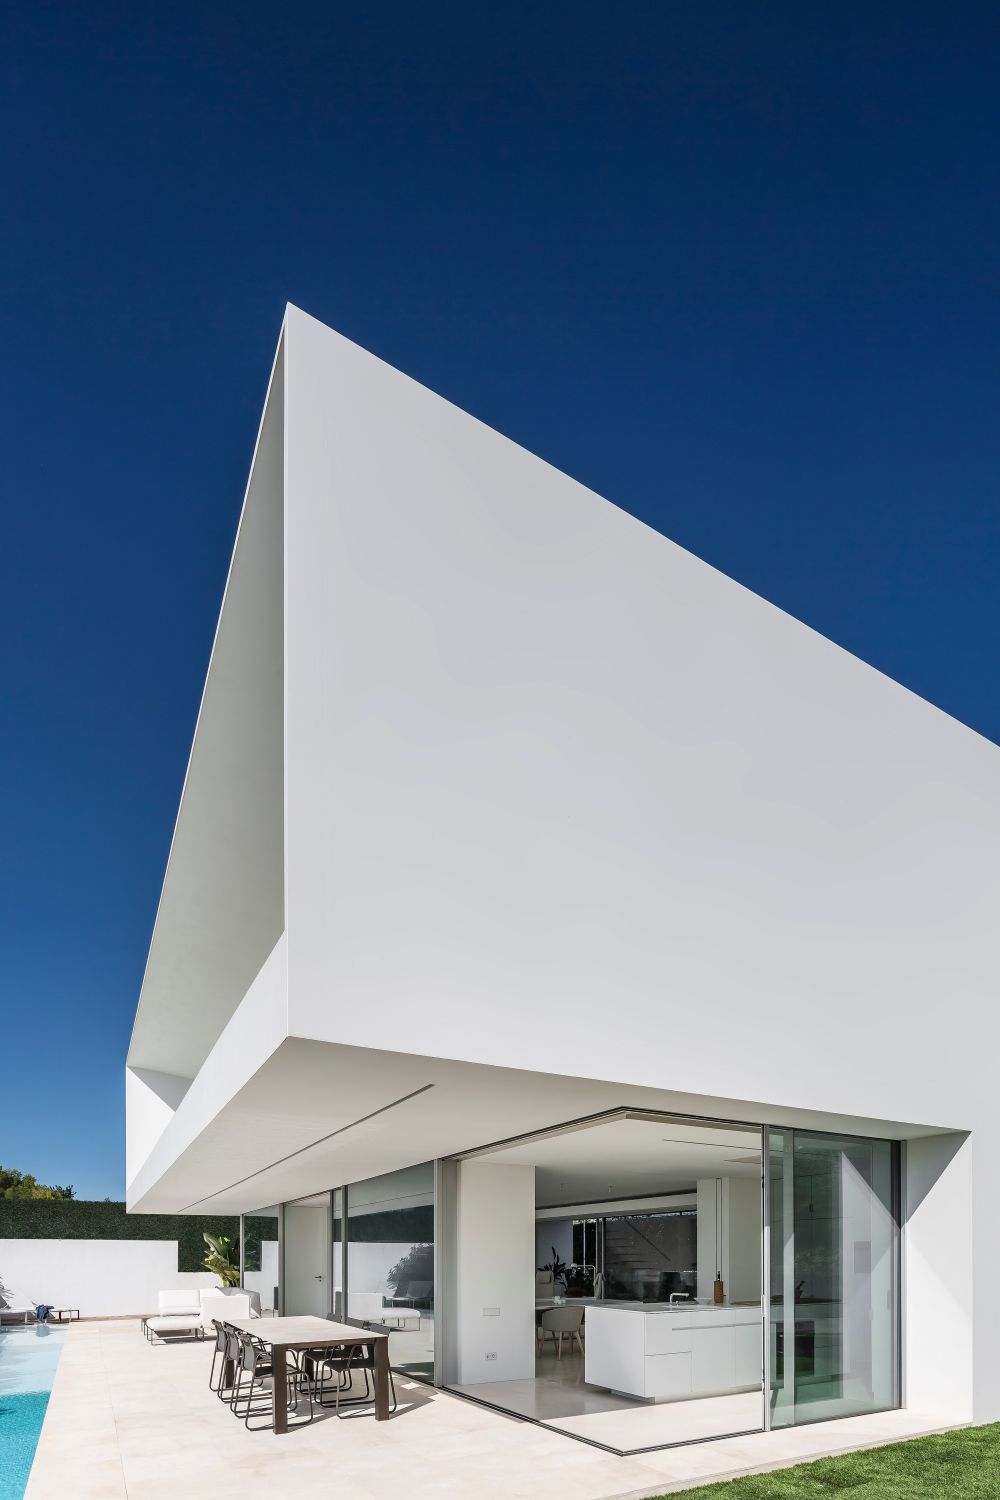  The house has a very clean and minimalistic aesthetic, featuring an all white exterior with large glazed surfaces